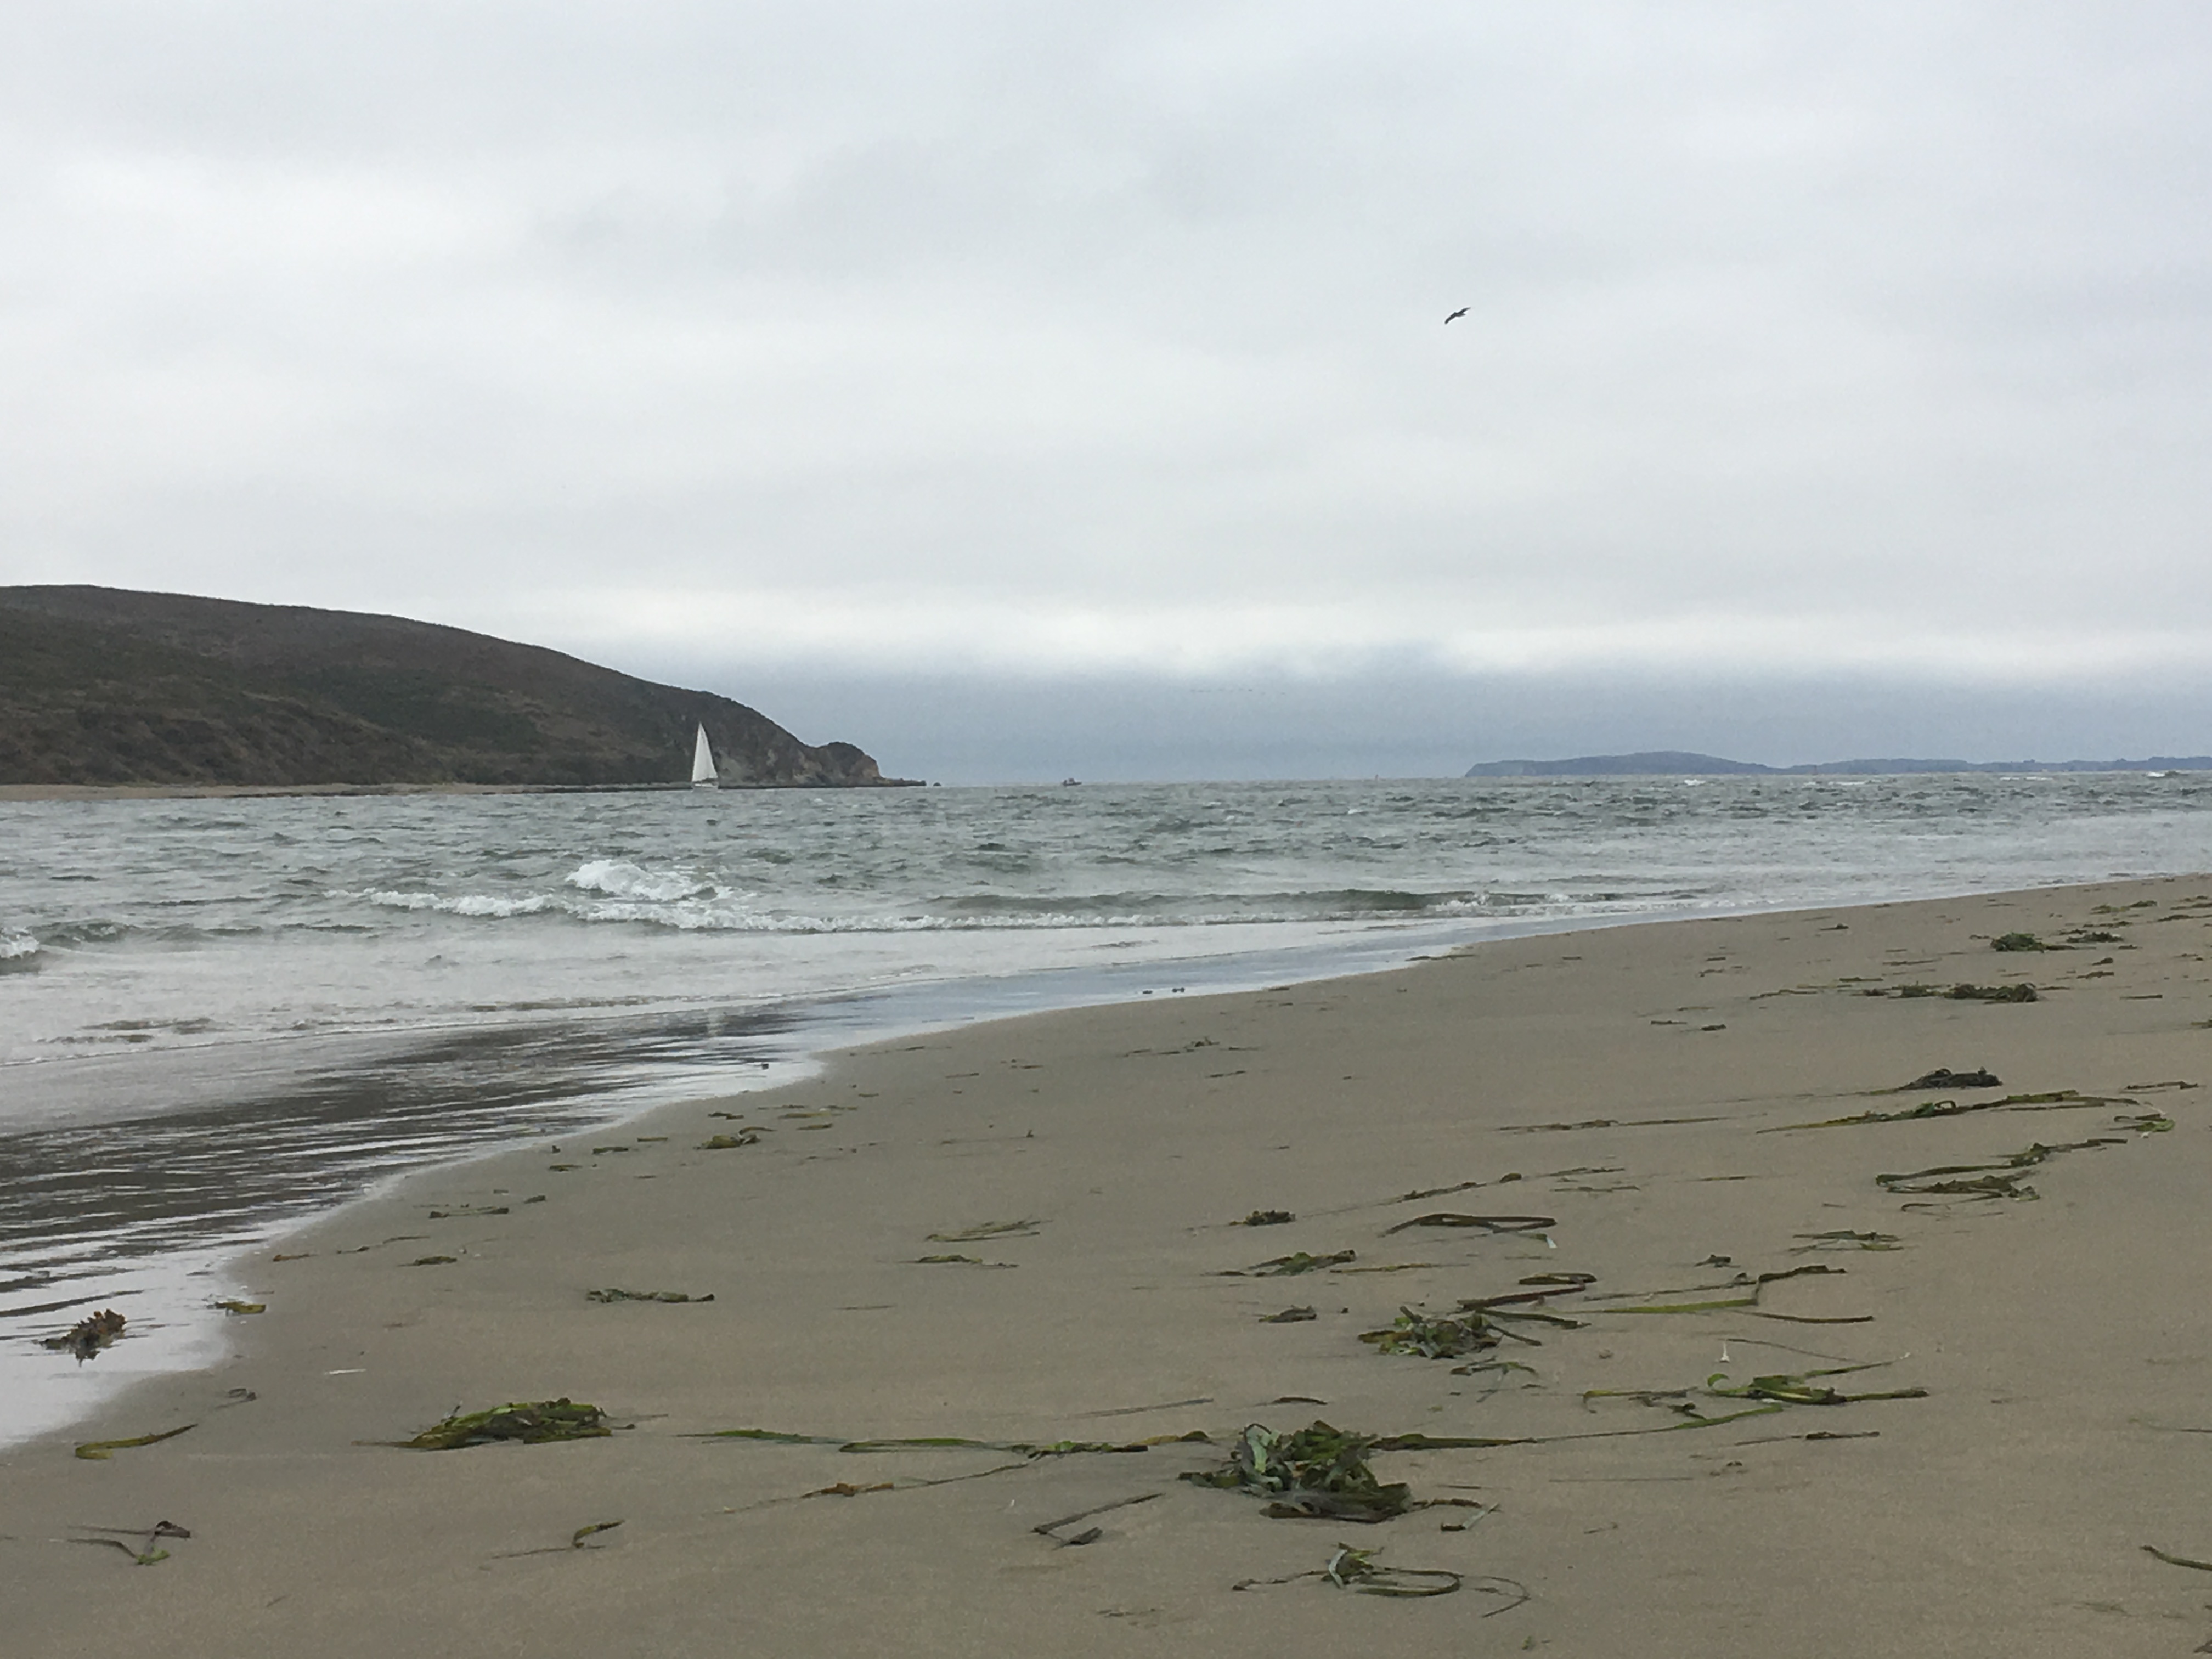 View of a beach in northern California on a foggy, gray day.